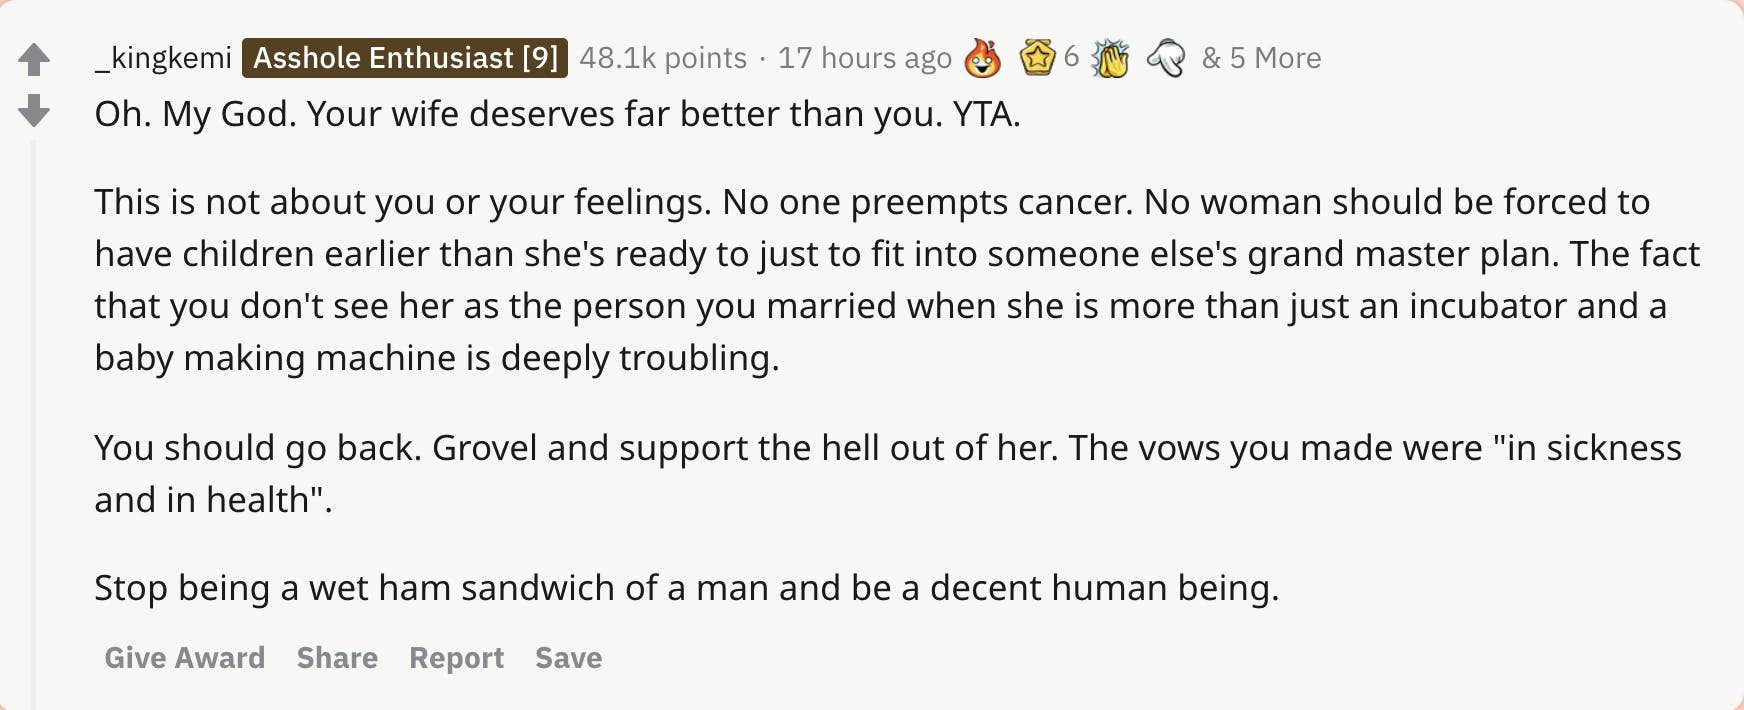 Oh. My God. Your wife deserves far better than you. YTA.  This is not about you or your feelings. No one preempts cancer. No woman should be forced to have children earlier than she's ready to just to fit into someone else's grand master plan. The fact that you don't see her as the person you married when she is more than just an incubator and a baby making machine is deeply troubling.  You should go back. Grovel and support the hell out of her. The vows you made were "in sickness and in health".  Stop being a wet ham sandwich of a man and be a decent human being.